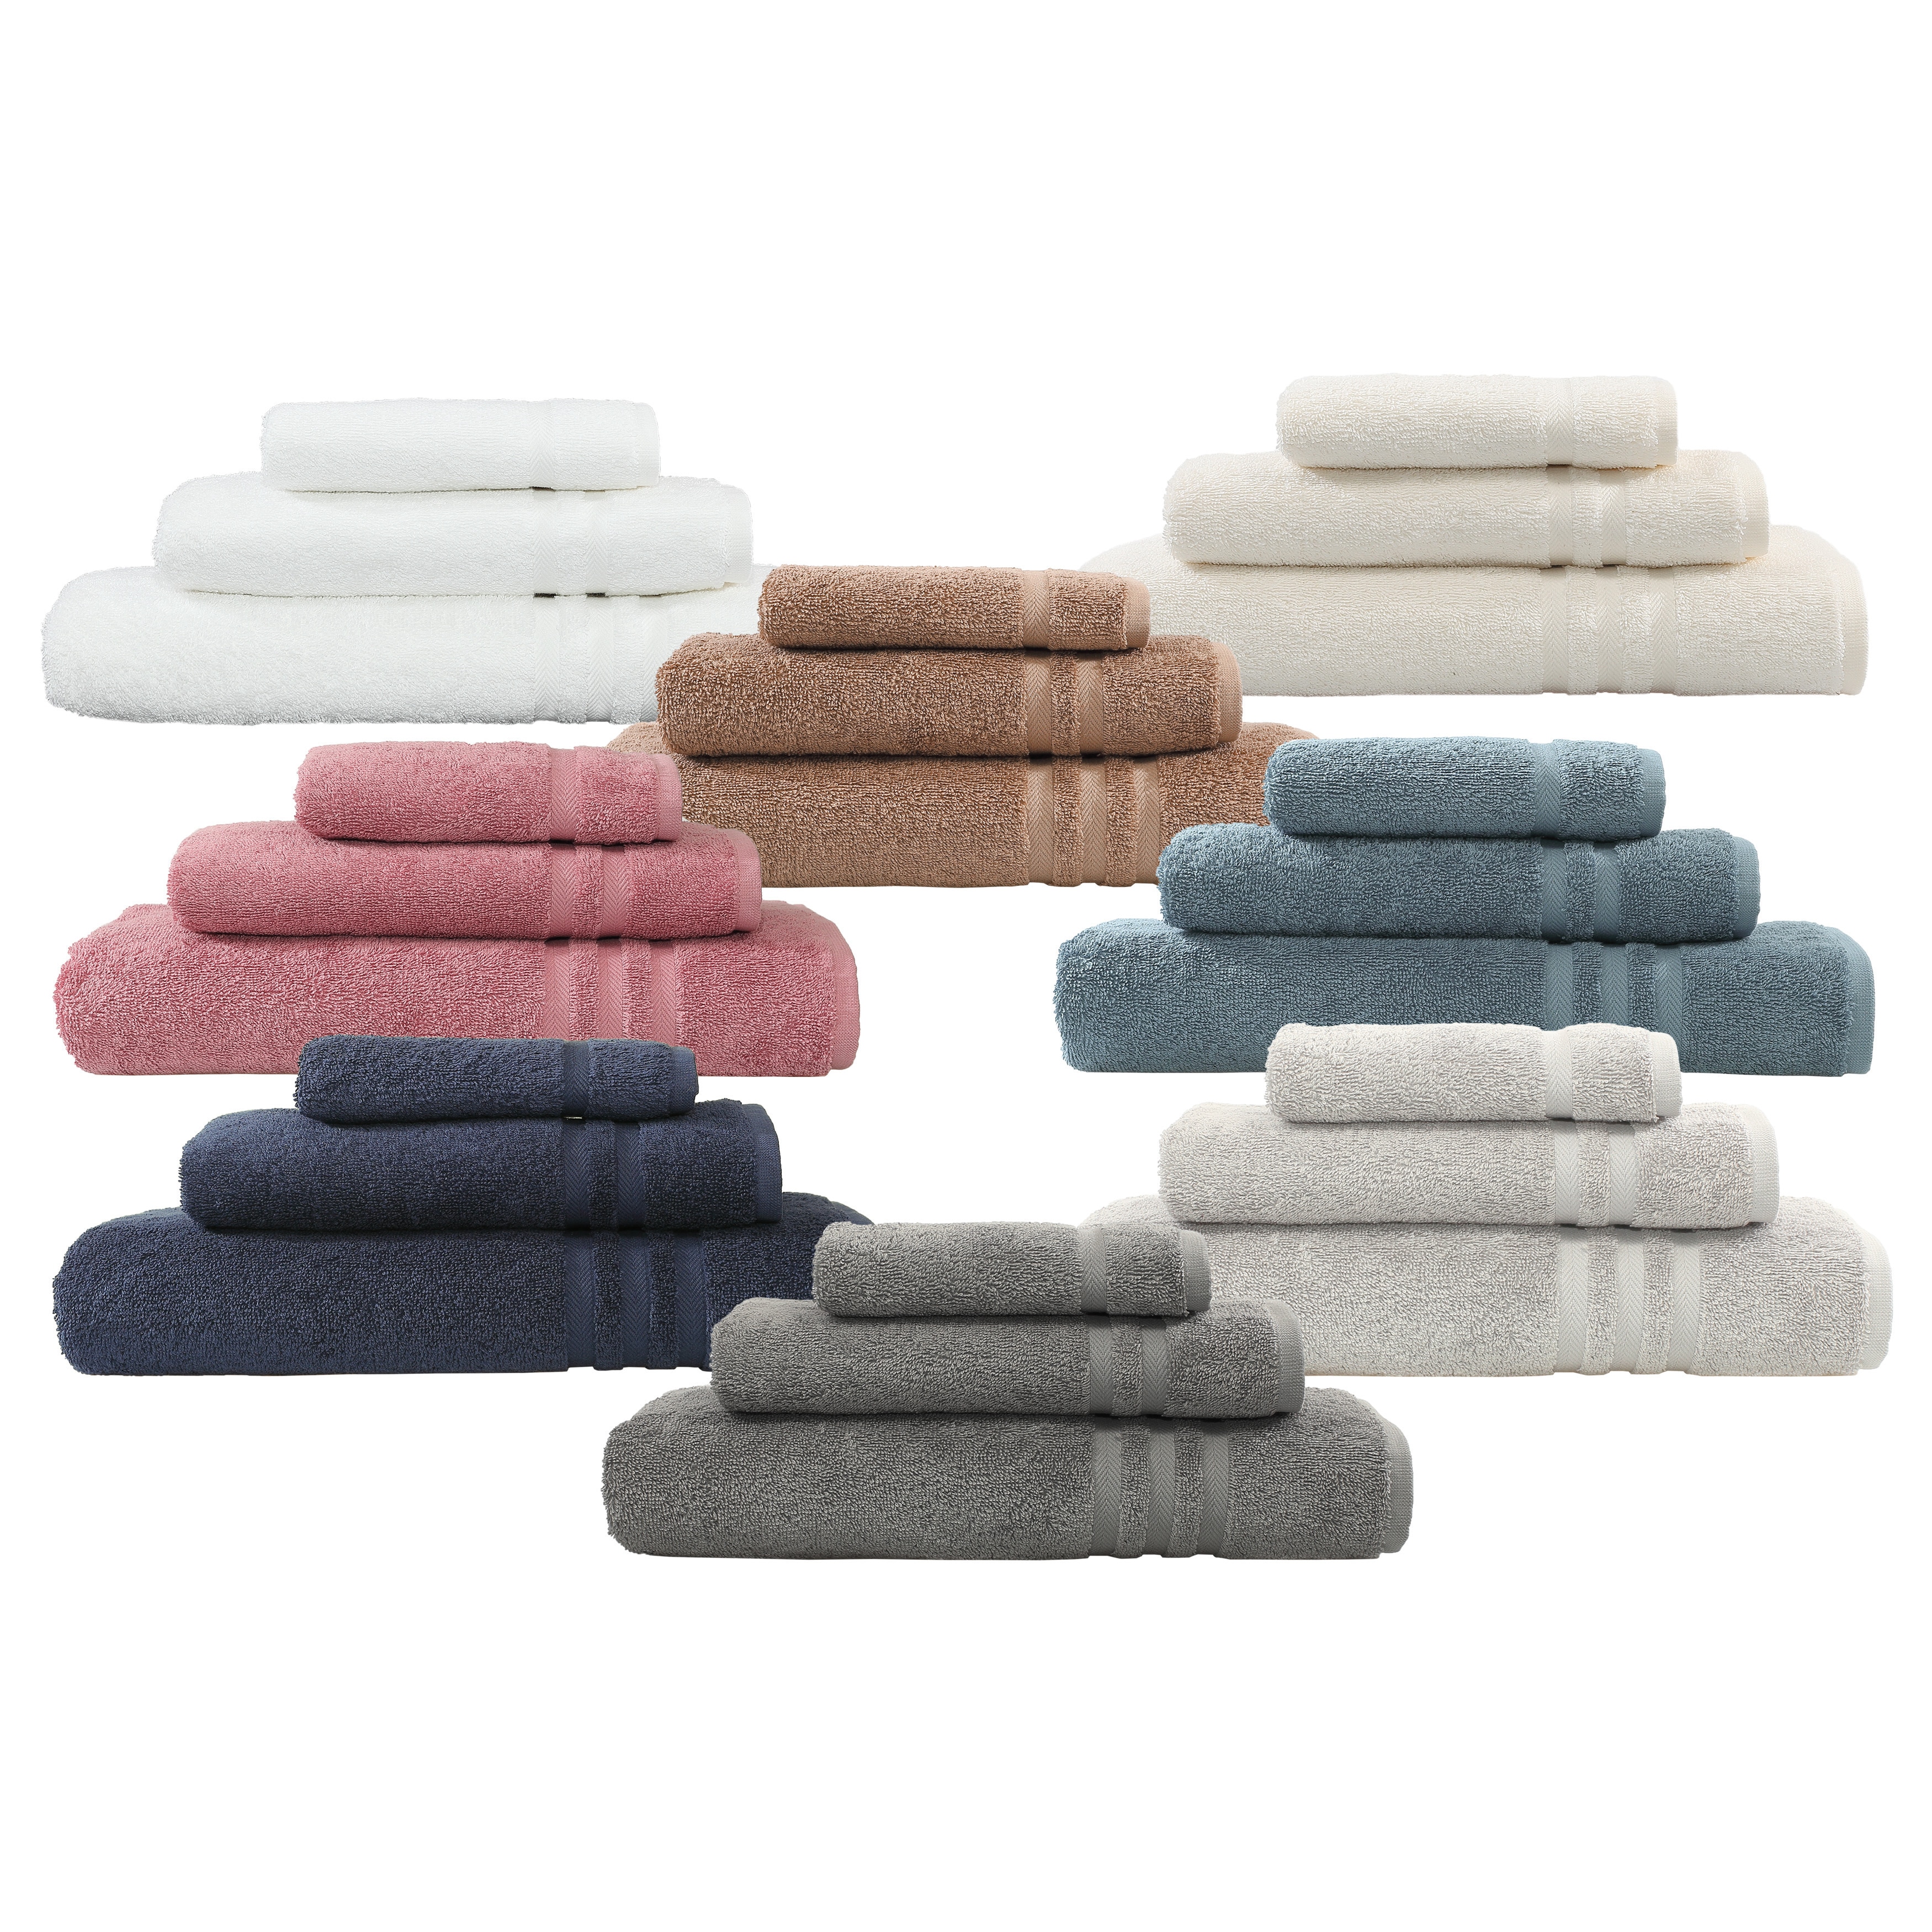 https://ak1.ostkcdn.com/images/products/18533832/Porch-Den-Balmont-Patterson-Hotel-Turkish-Cotton-3-piece-Terry-Towel-Set-ee2c94c8-52bf-4303-b7be-ea44f146ae21.jpg